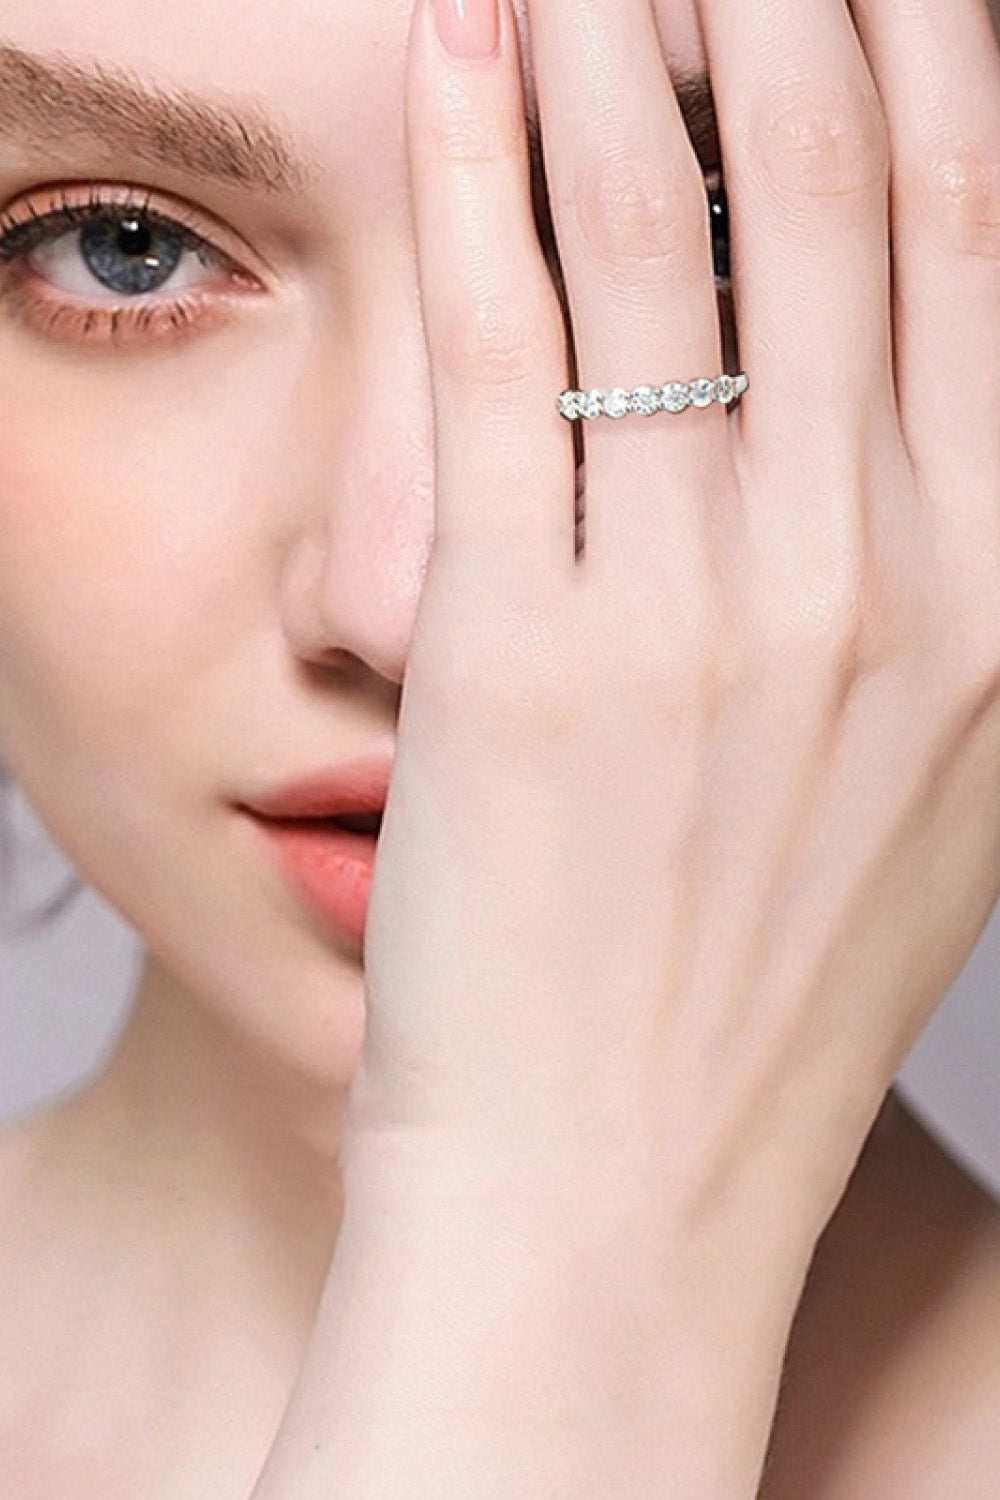 .7 Carat Can't Stop Your Shine Moissanite Platinum-Plated Ring